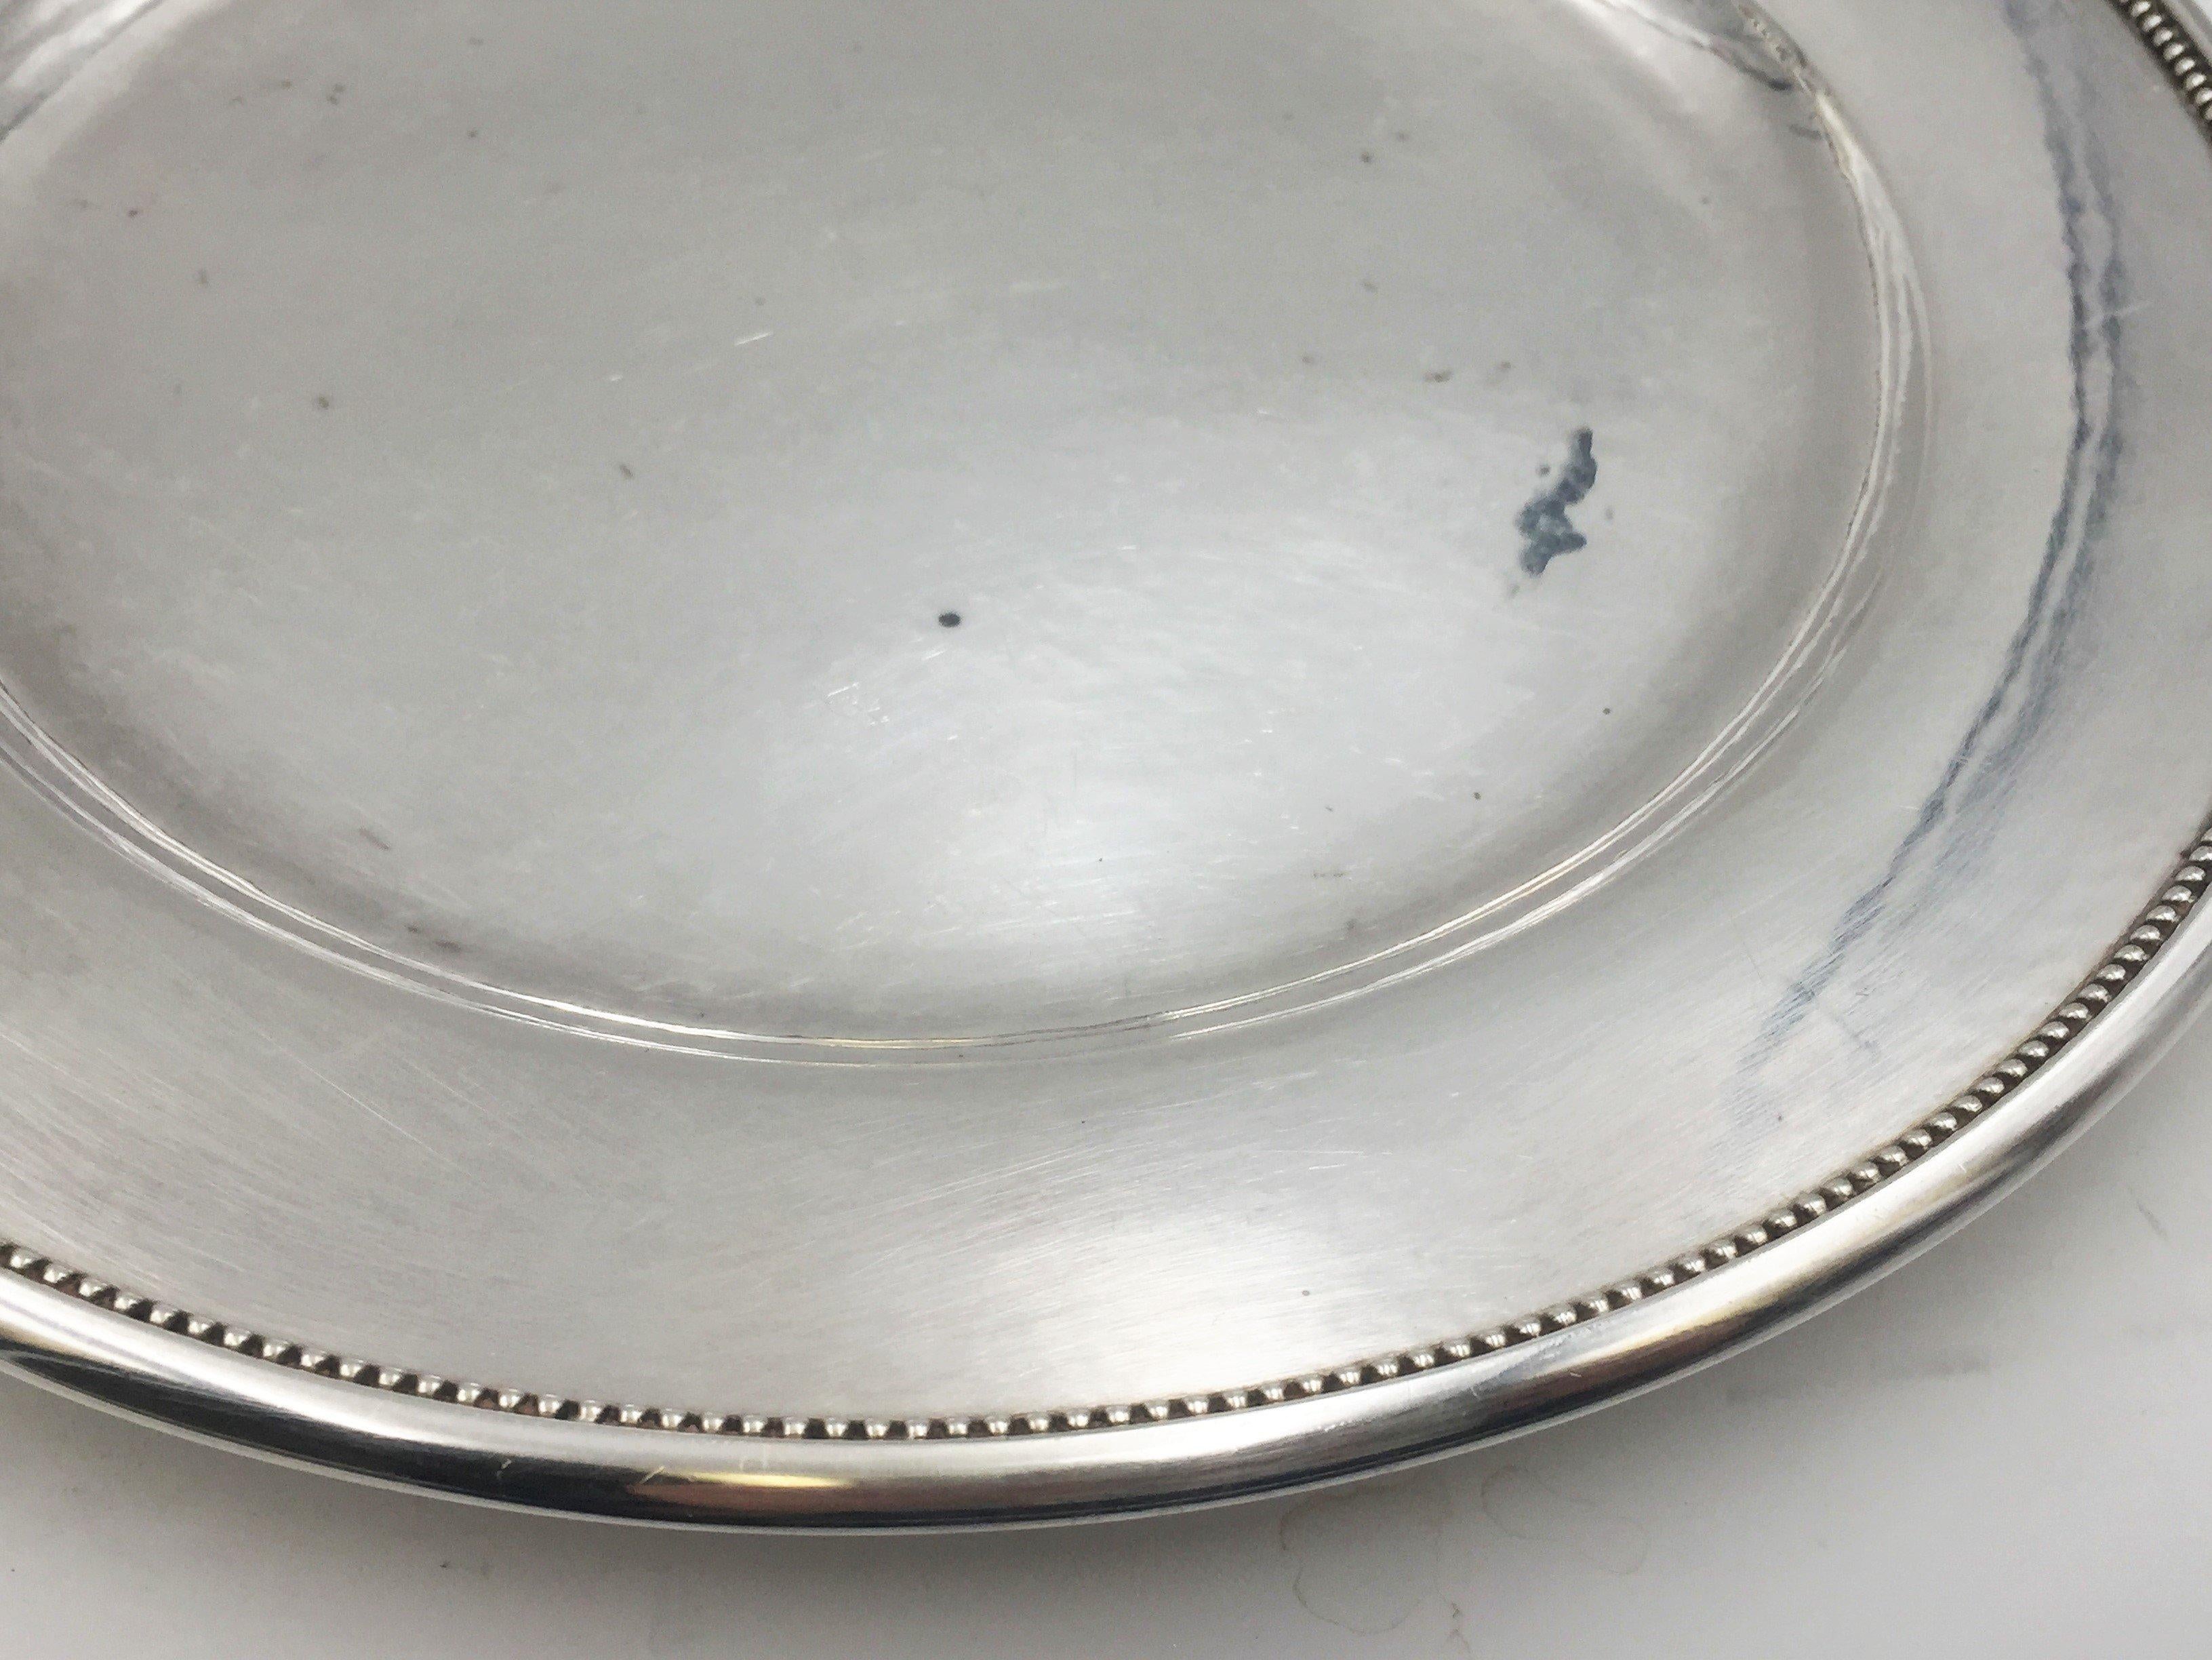 Beautiful Georg Jensen hand hammered sterling silver round plate / platter/ tray in pattern 210F measuring 10 1/4'' in diameter and with beaded rim. Weight is 19 troy ounces. Bearing hallmarks as shown.

Danish silversmith Georg Jensen (1866-1935)